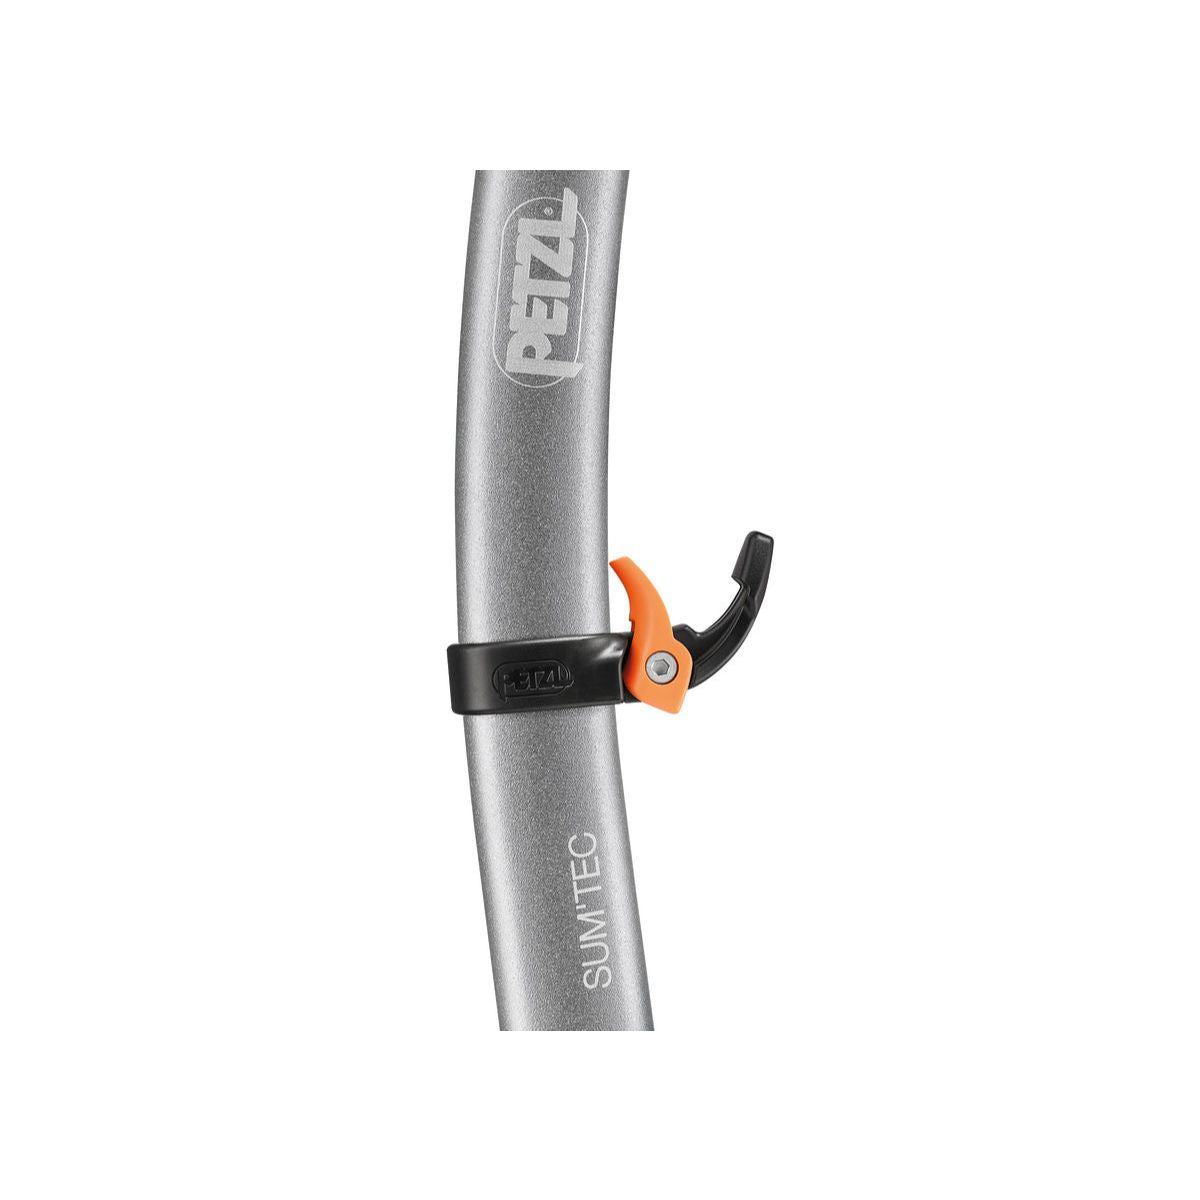 Petzl Trigrest trigger for summit ice axes in black and orange on upper of ice axe]